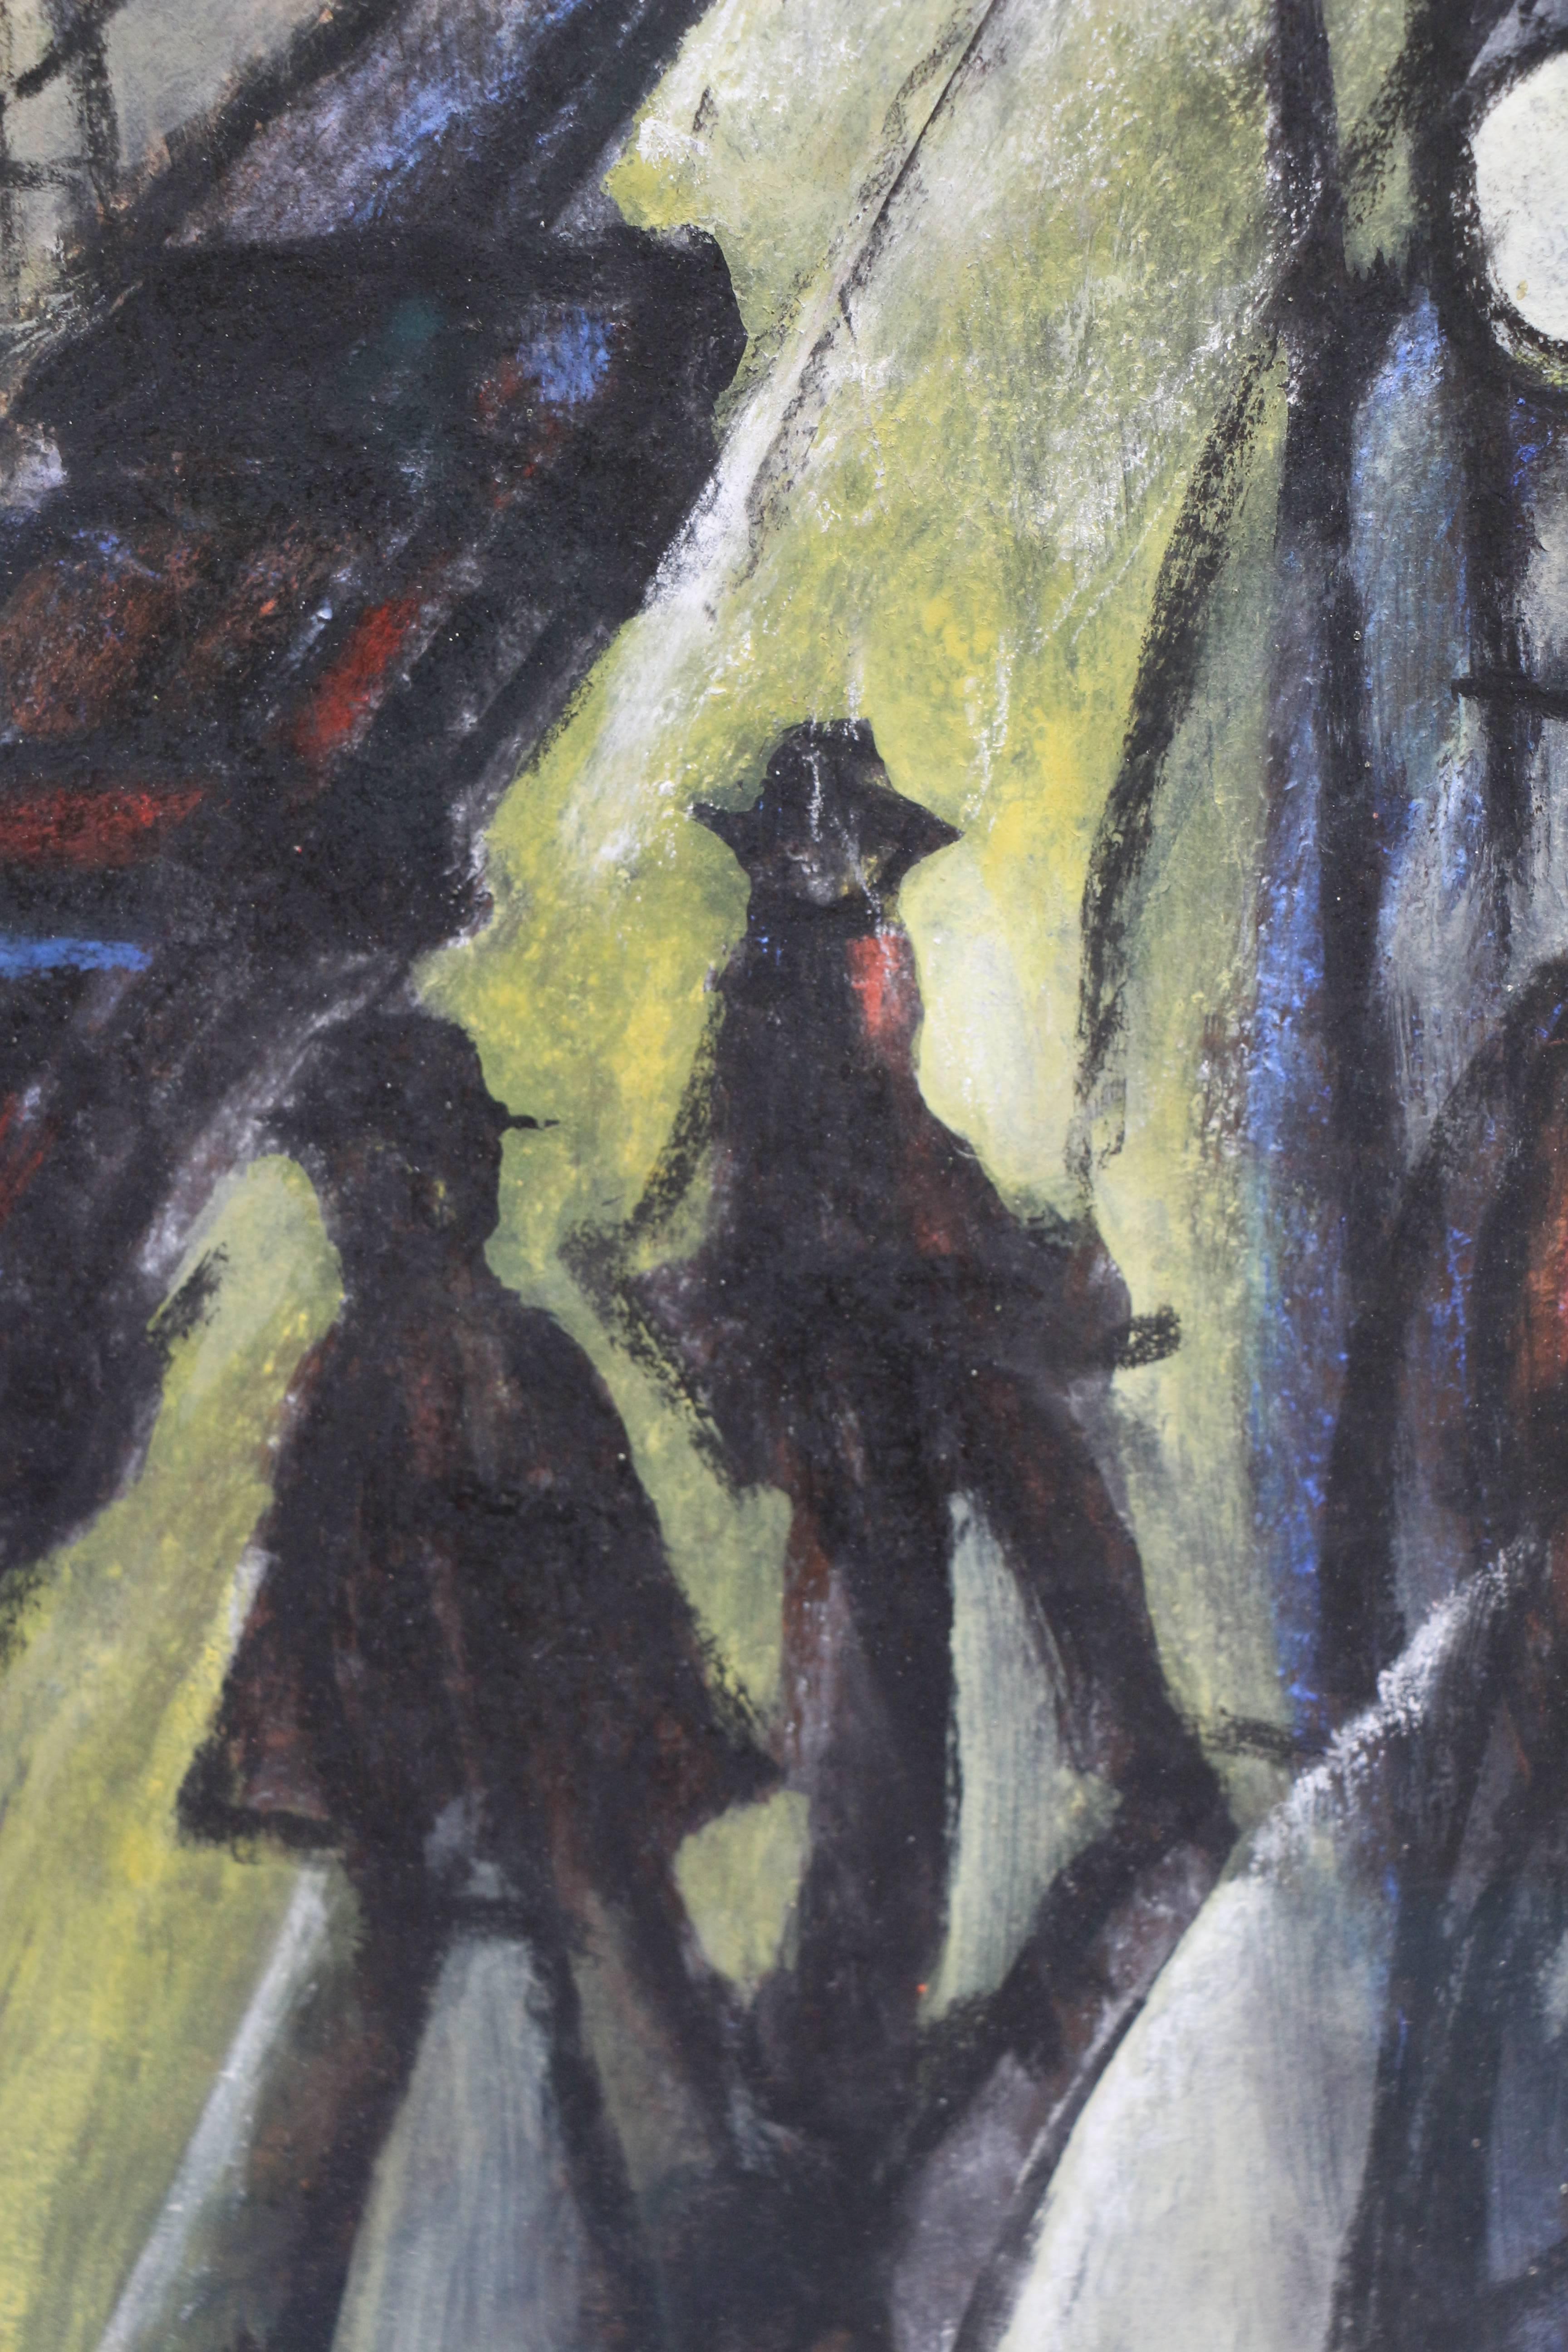 Nocturnal Cityscape, work on paper depicting city at night with people walking For Sale 1